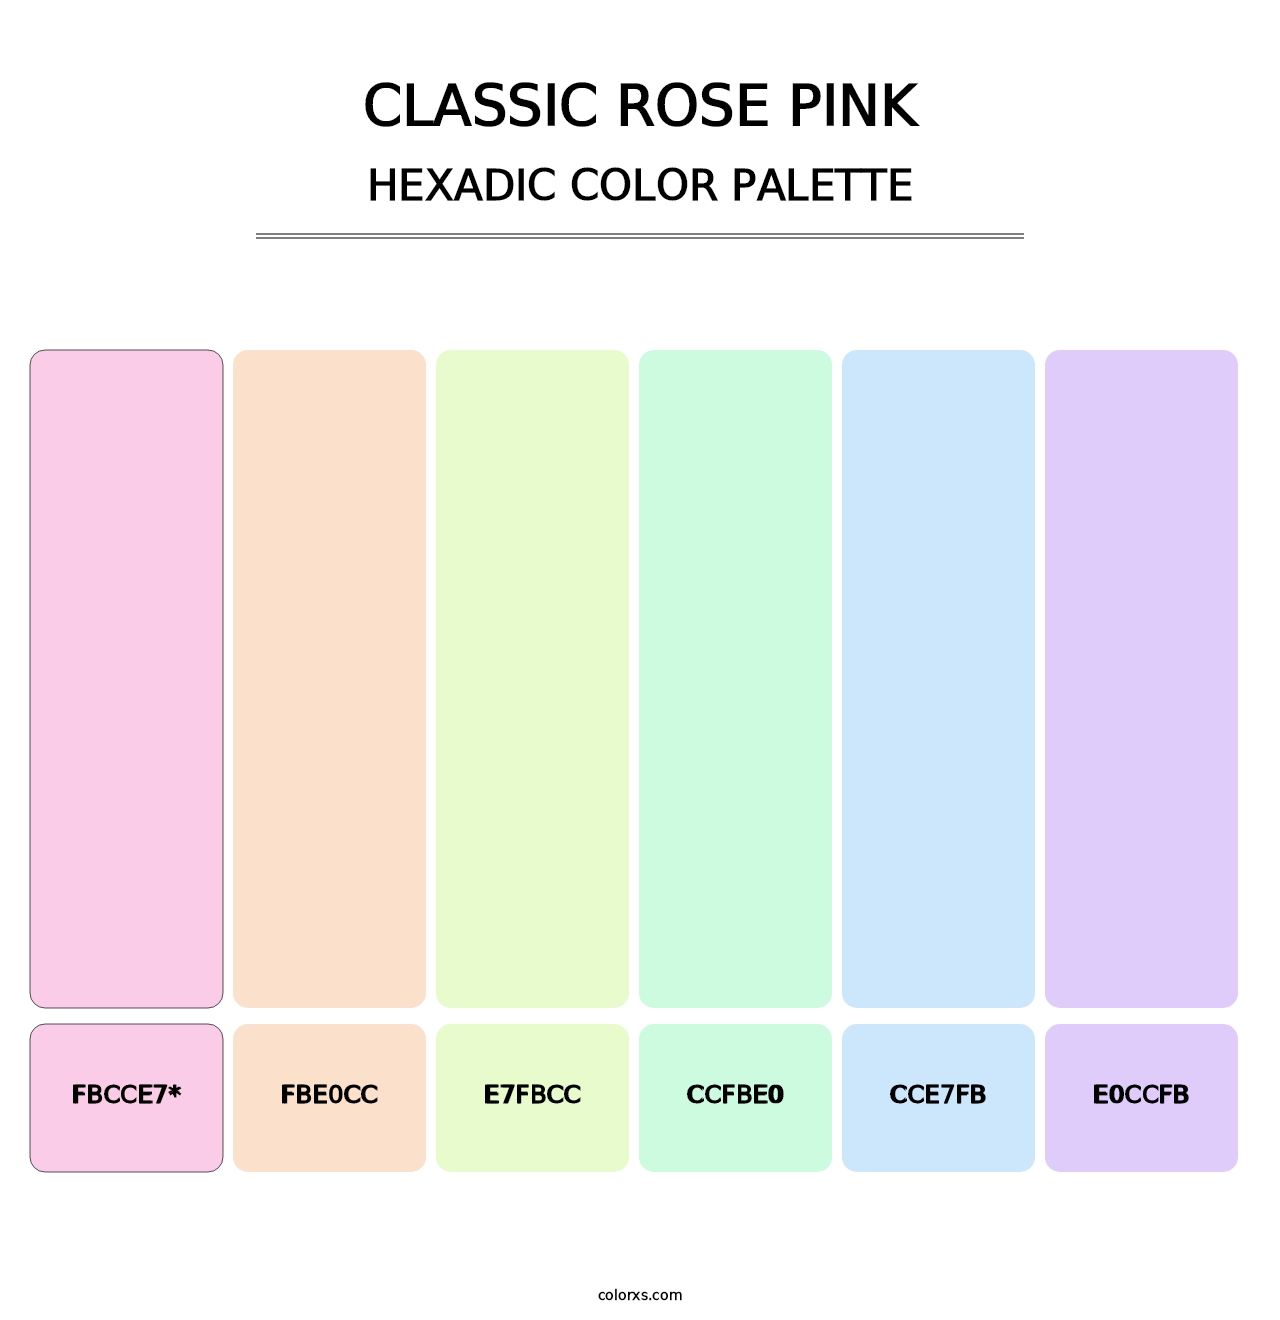 Classic Rose Pink - Hexadic Color Palette